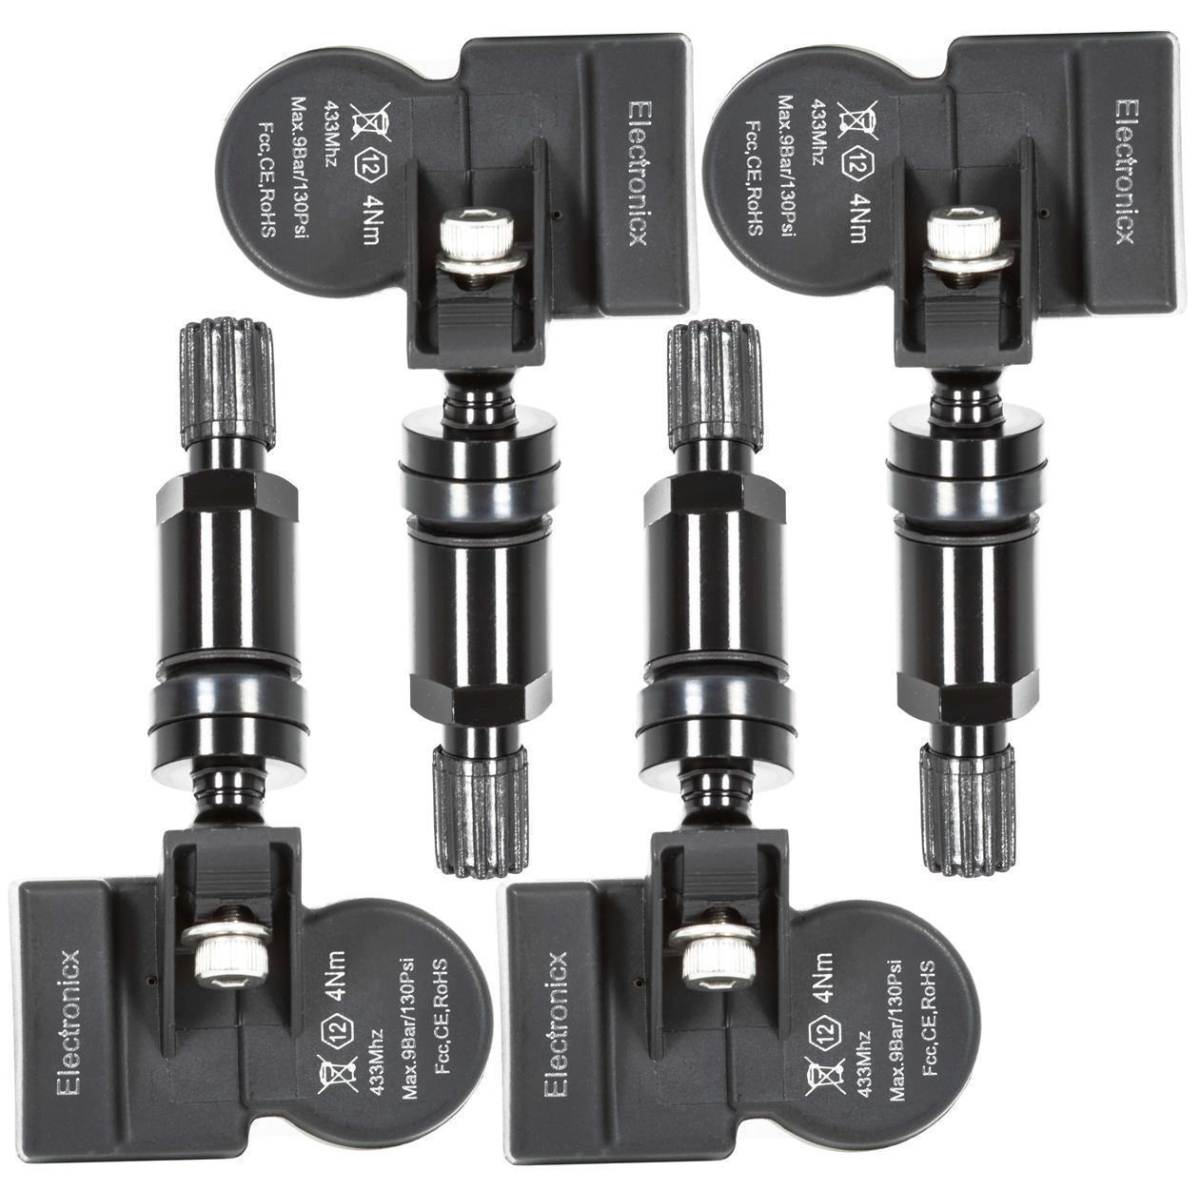 4x TPMS tire pressure sensors metal valve black for VW Crafter 2006 to 2014 OE 2E0907508F